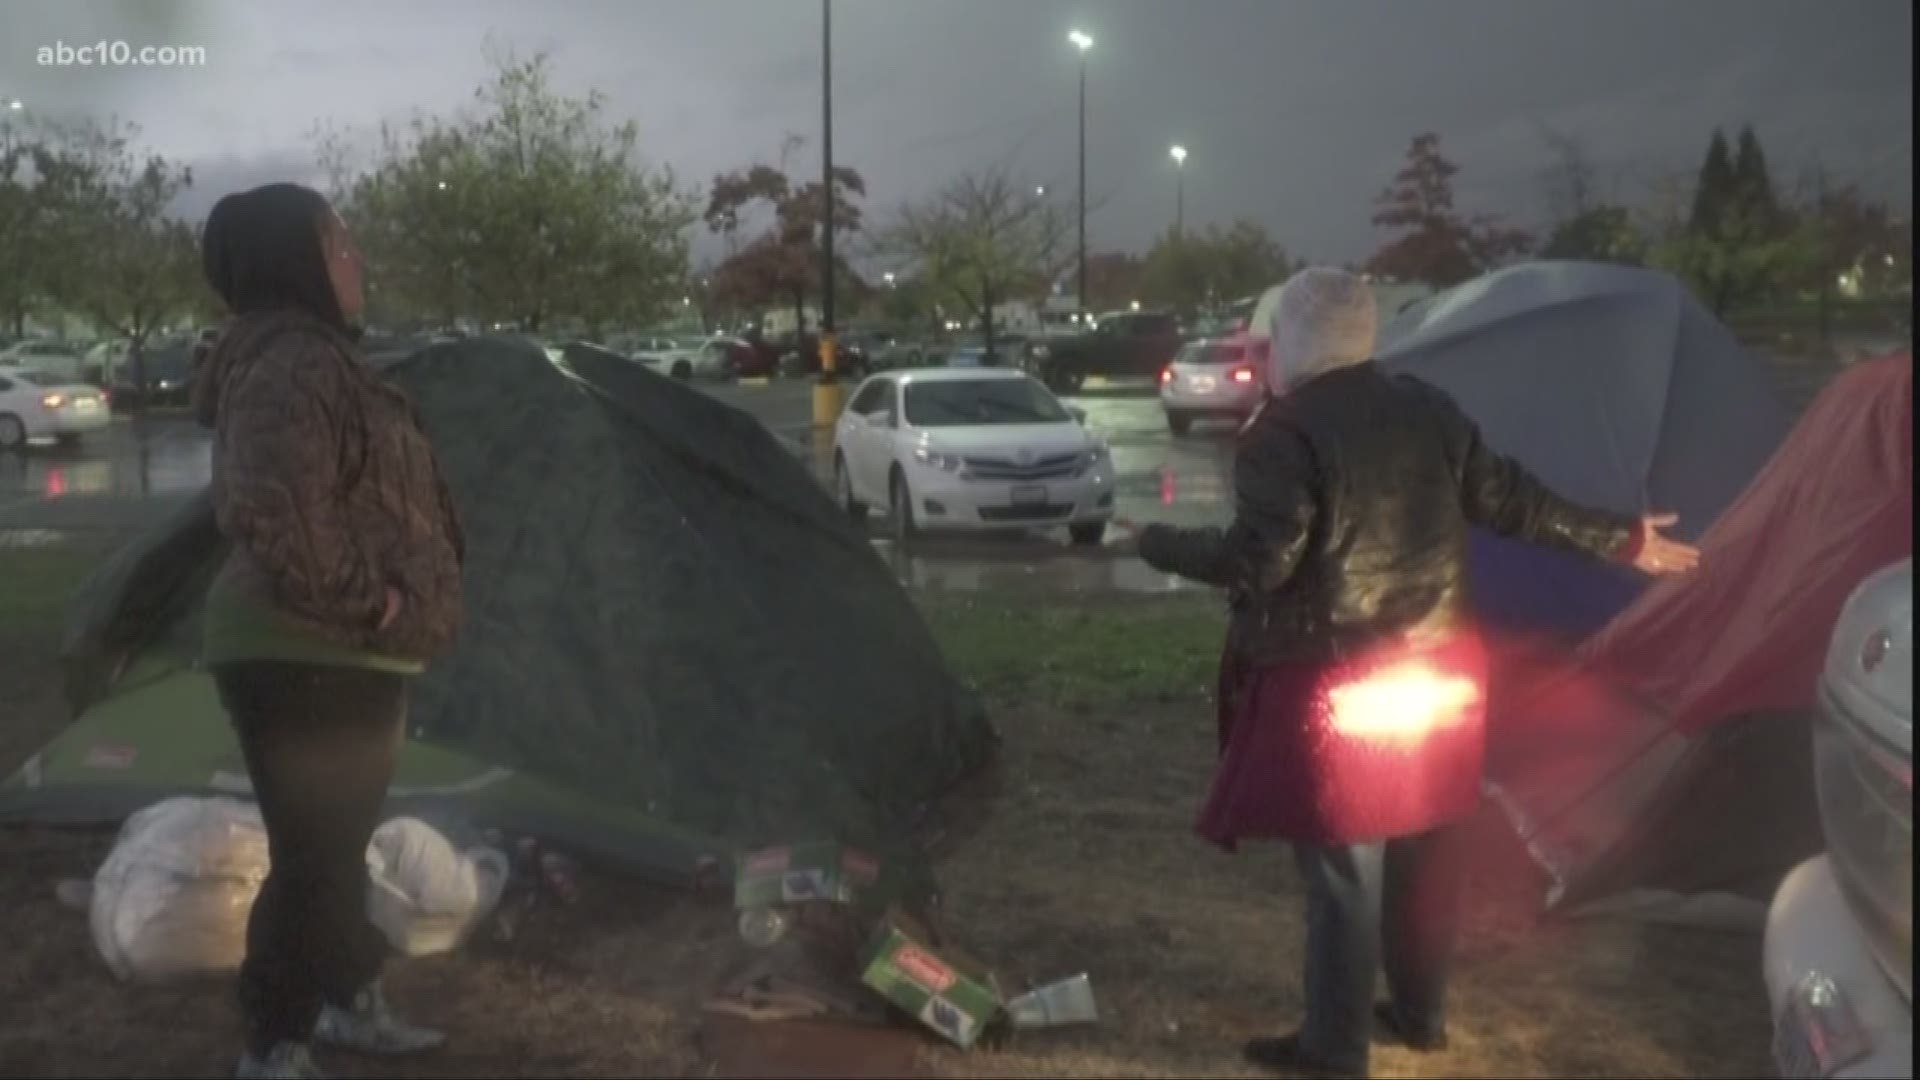 Several survivors told ABC10 they've decided to stay in the Walmart parking lot because they're still not quite sure where to go.